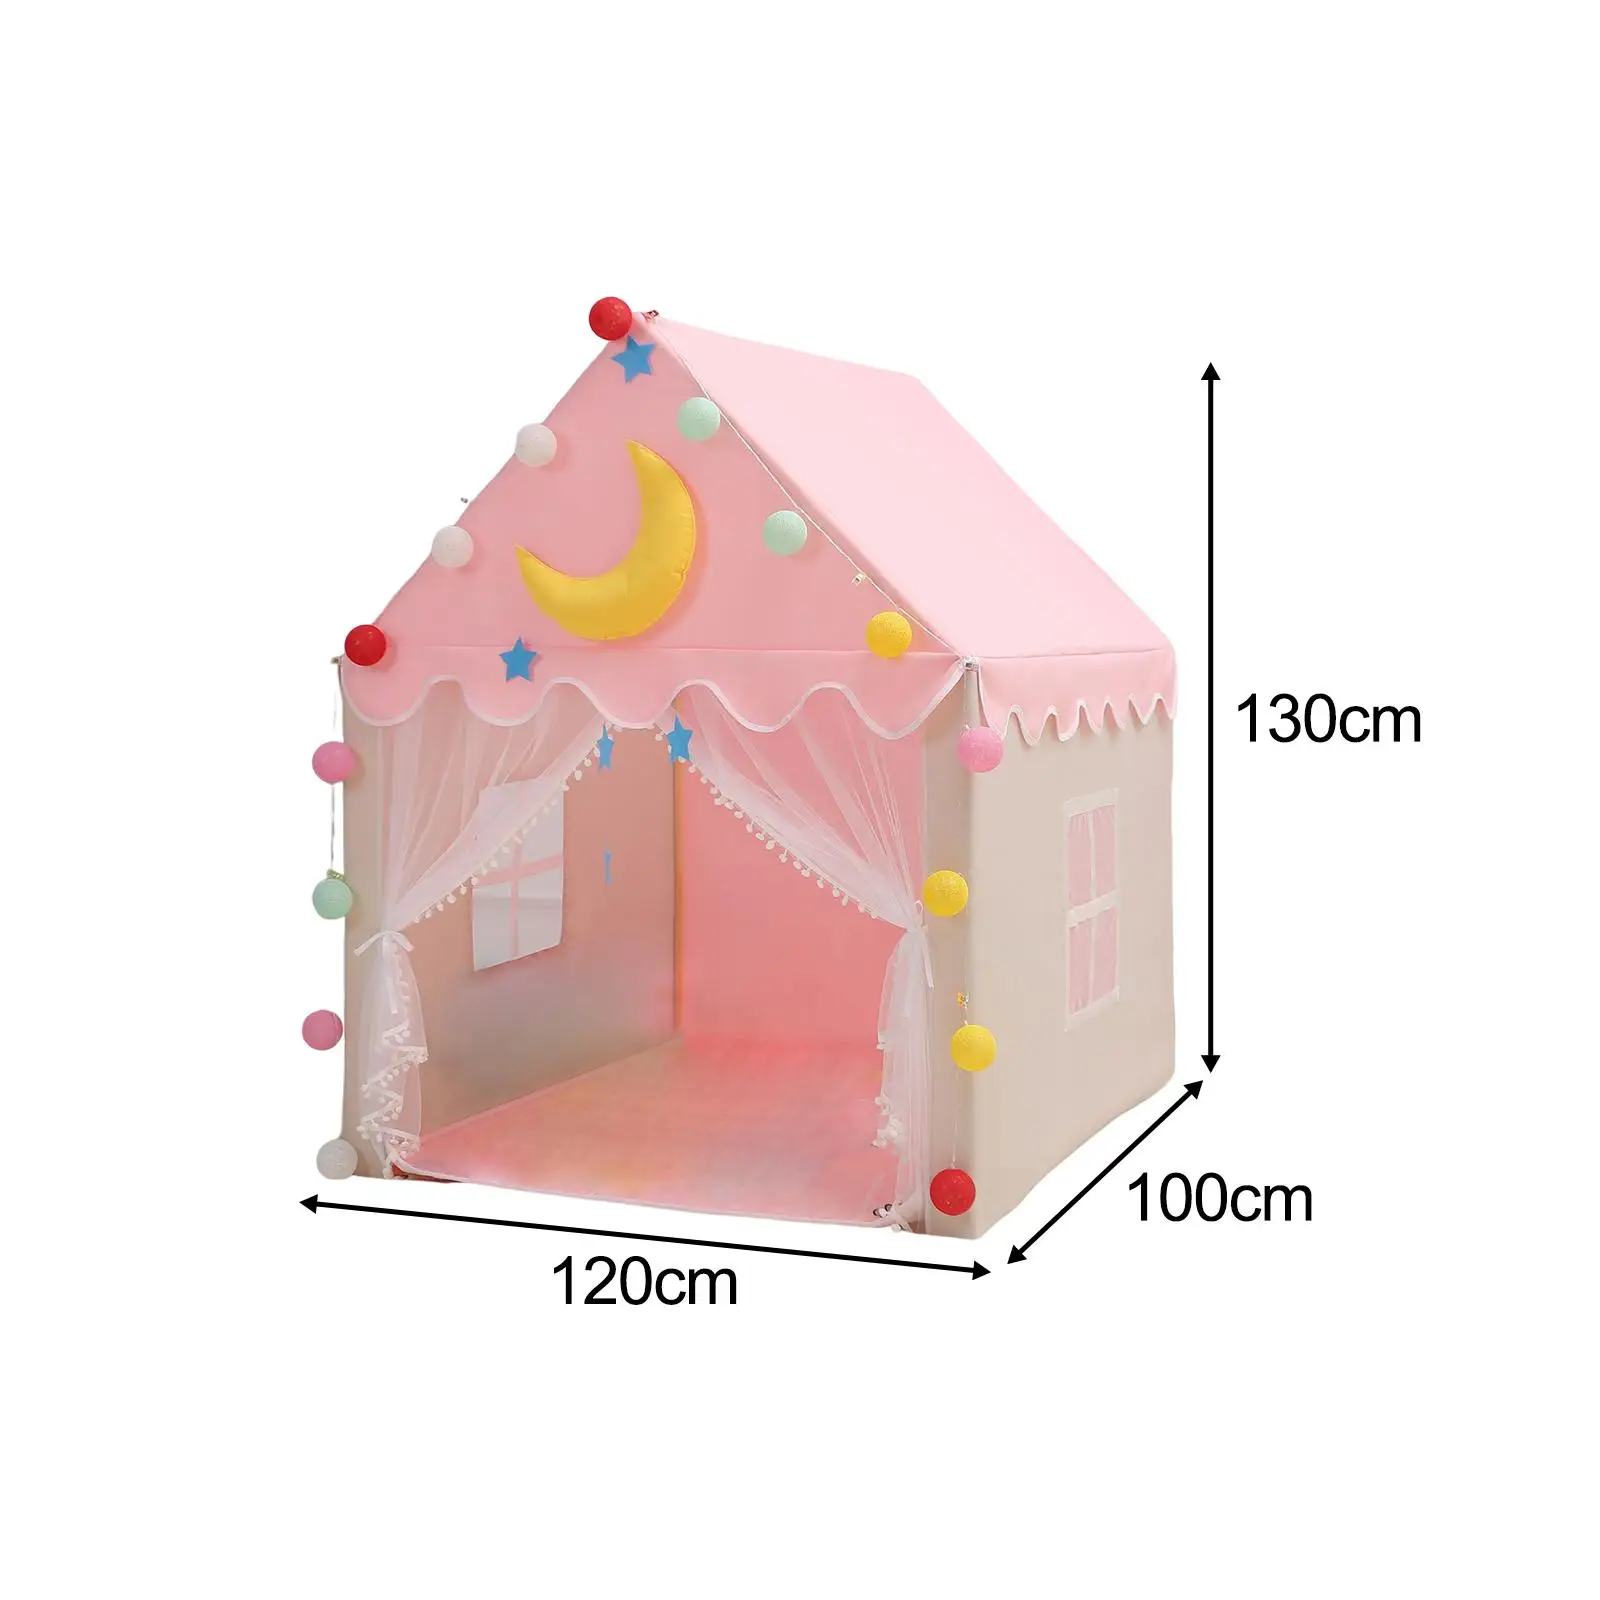 Playhouse Tent Toy Lightweight Playroom Reading Tent Foldable Indoor and Play Tent for Girls Toddlers Kids Children Boys